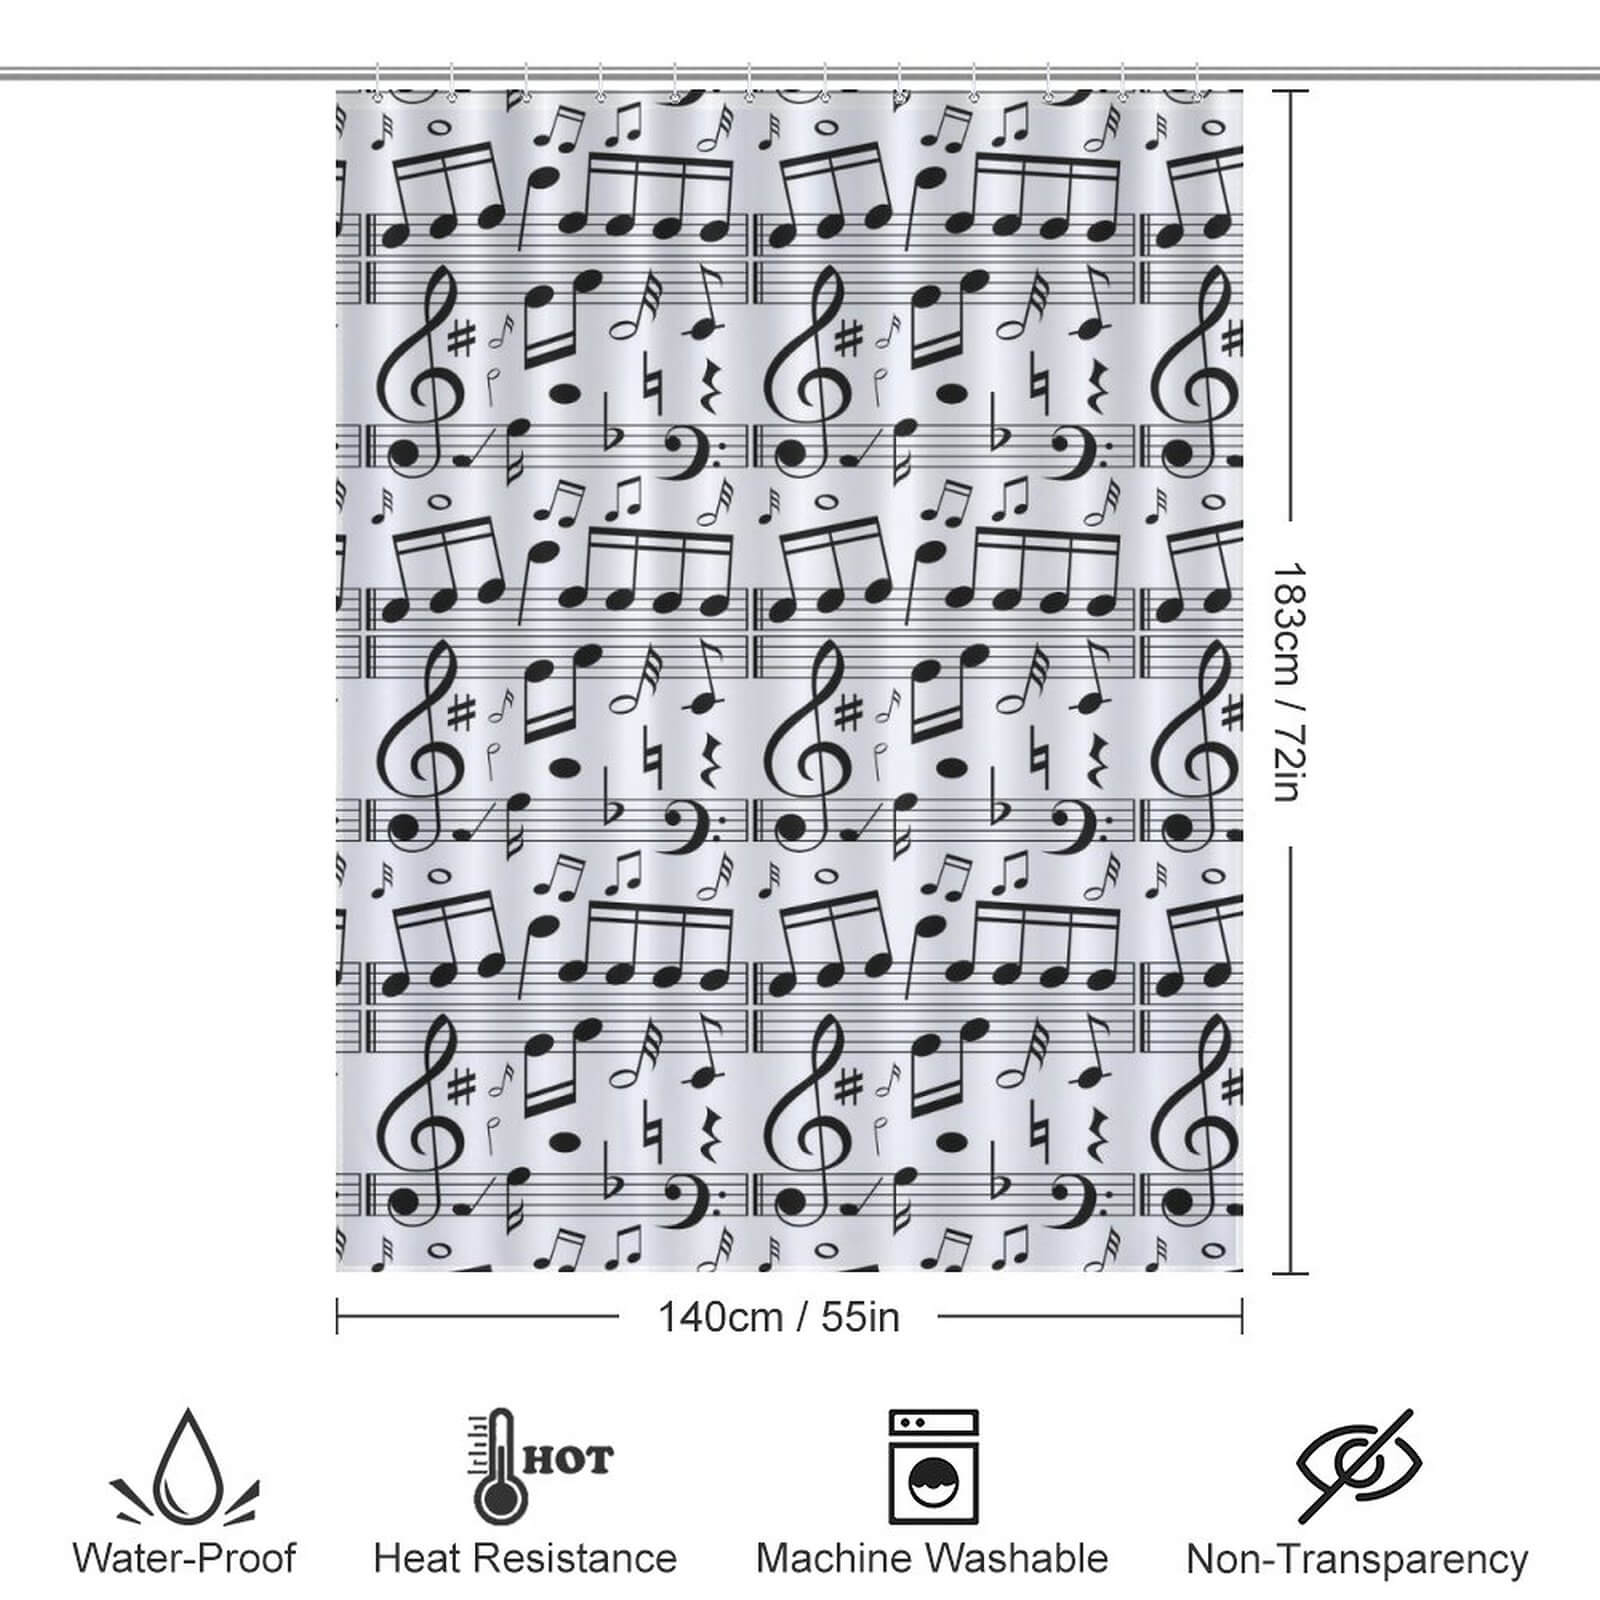 A black and white Music Notes Shower Curtain-Cottoncat, perfect for adding a touch of musical elegance to your bathroom decor, adorned with music notes.